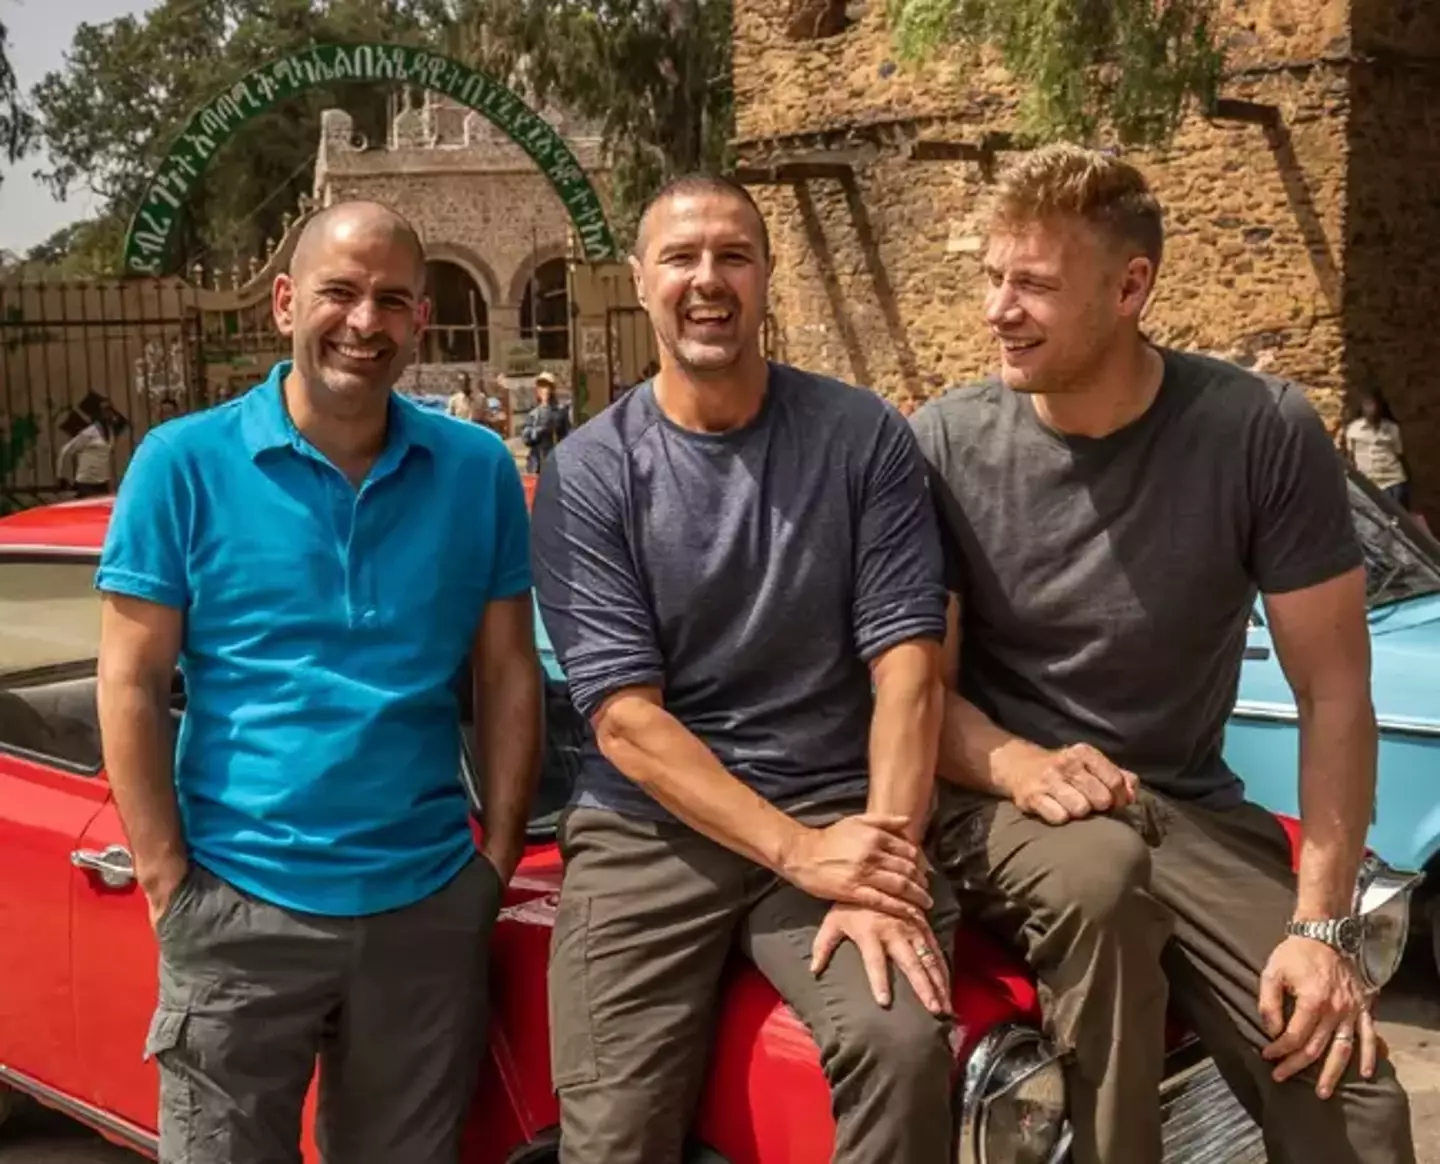 Top Gear is on 'rest' for the foreseeable future following Freddie Flintoff's shocking car accident.